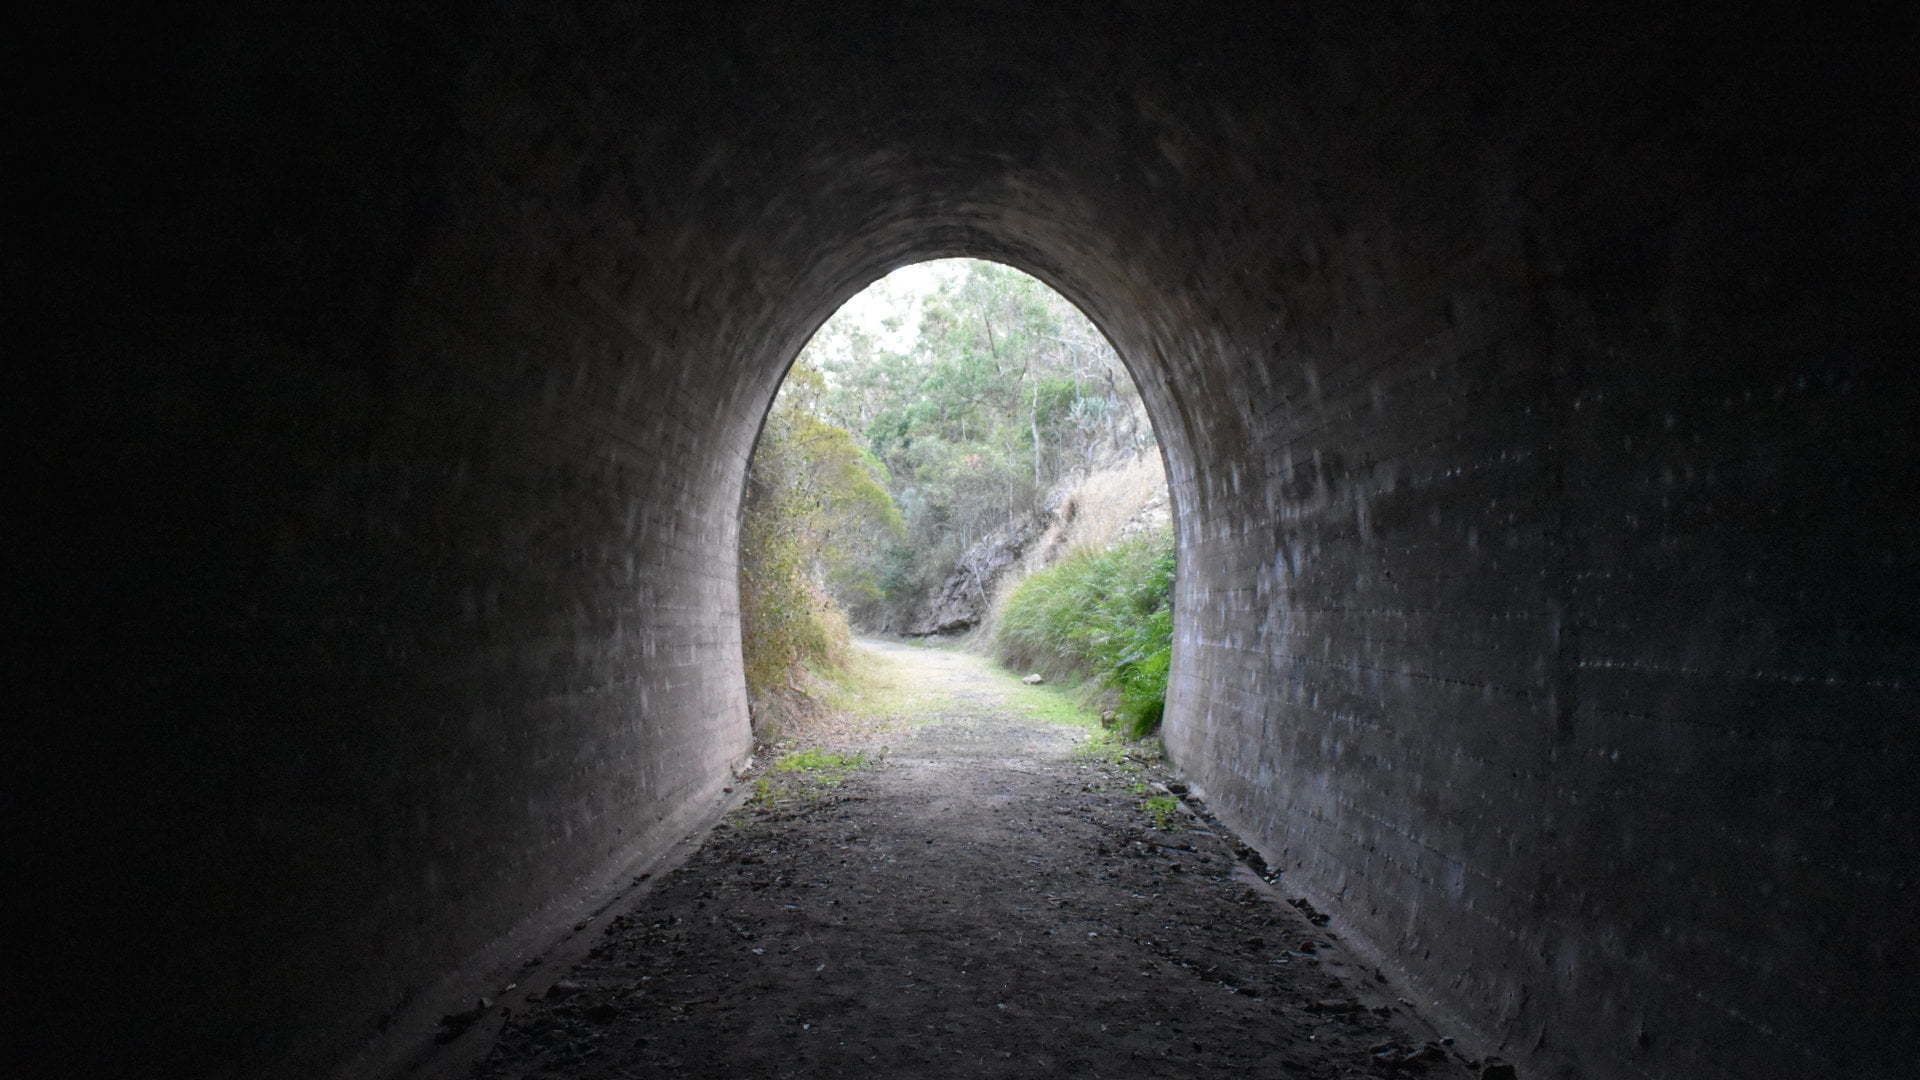 Lookout out from inside the Muntapa Tunnel, Queensland's longest straight railway tunnel that operated between 1913 and 1964, on an old railway line between Oakey and Cooyar